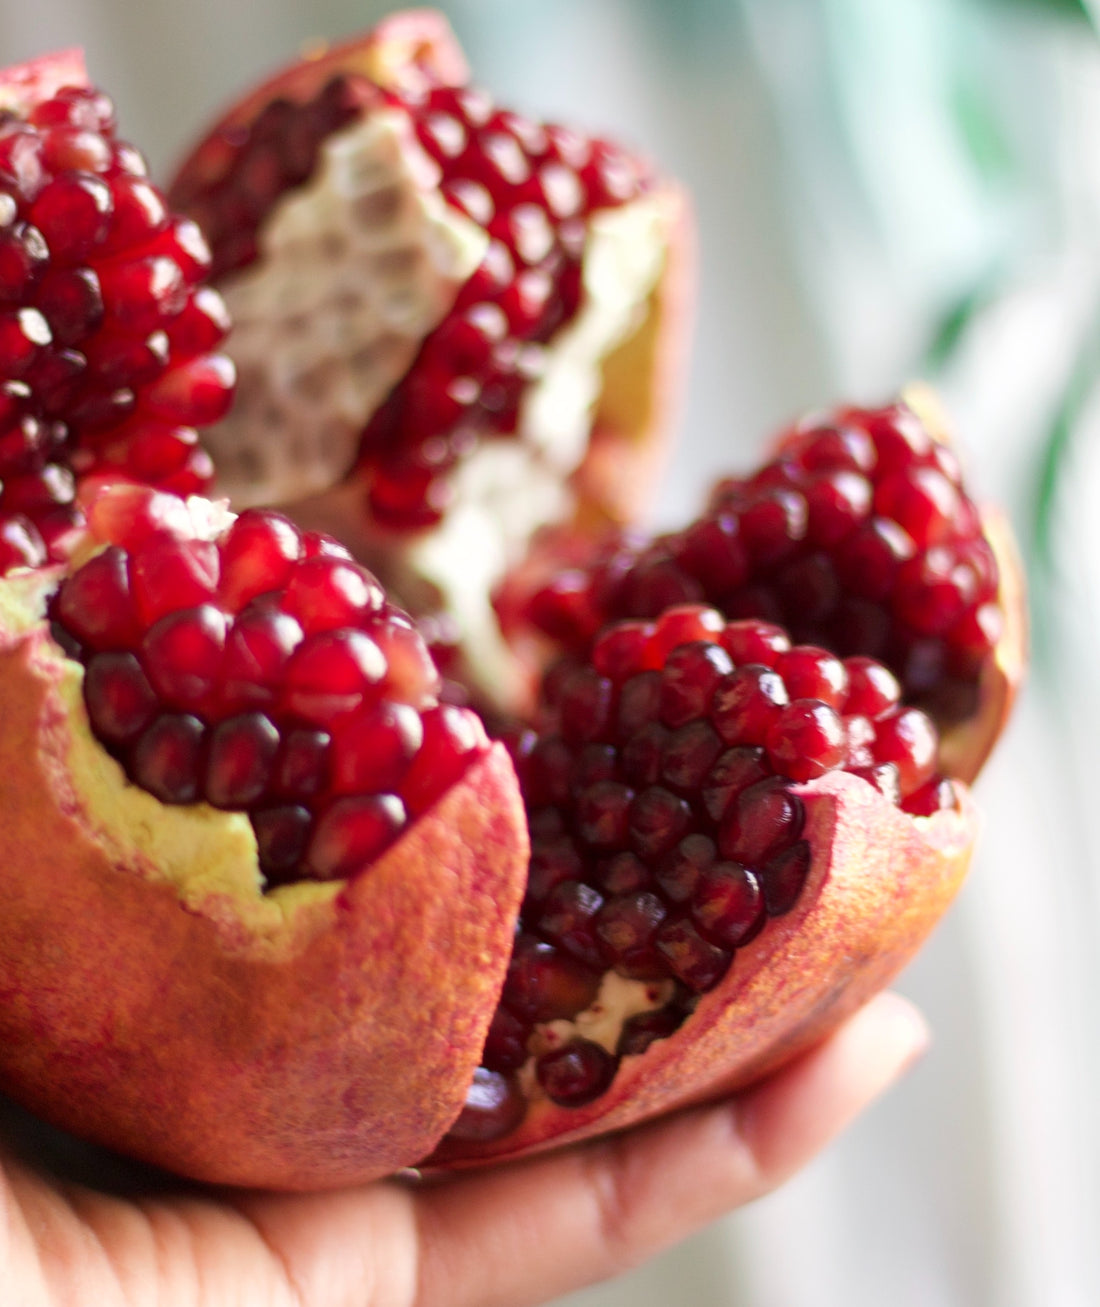 A pomegranate skin split open in chunks, being held by a white hand against a light background